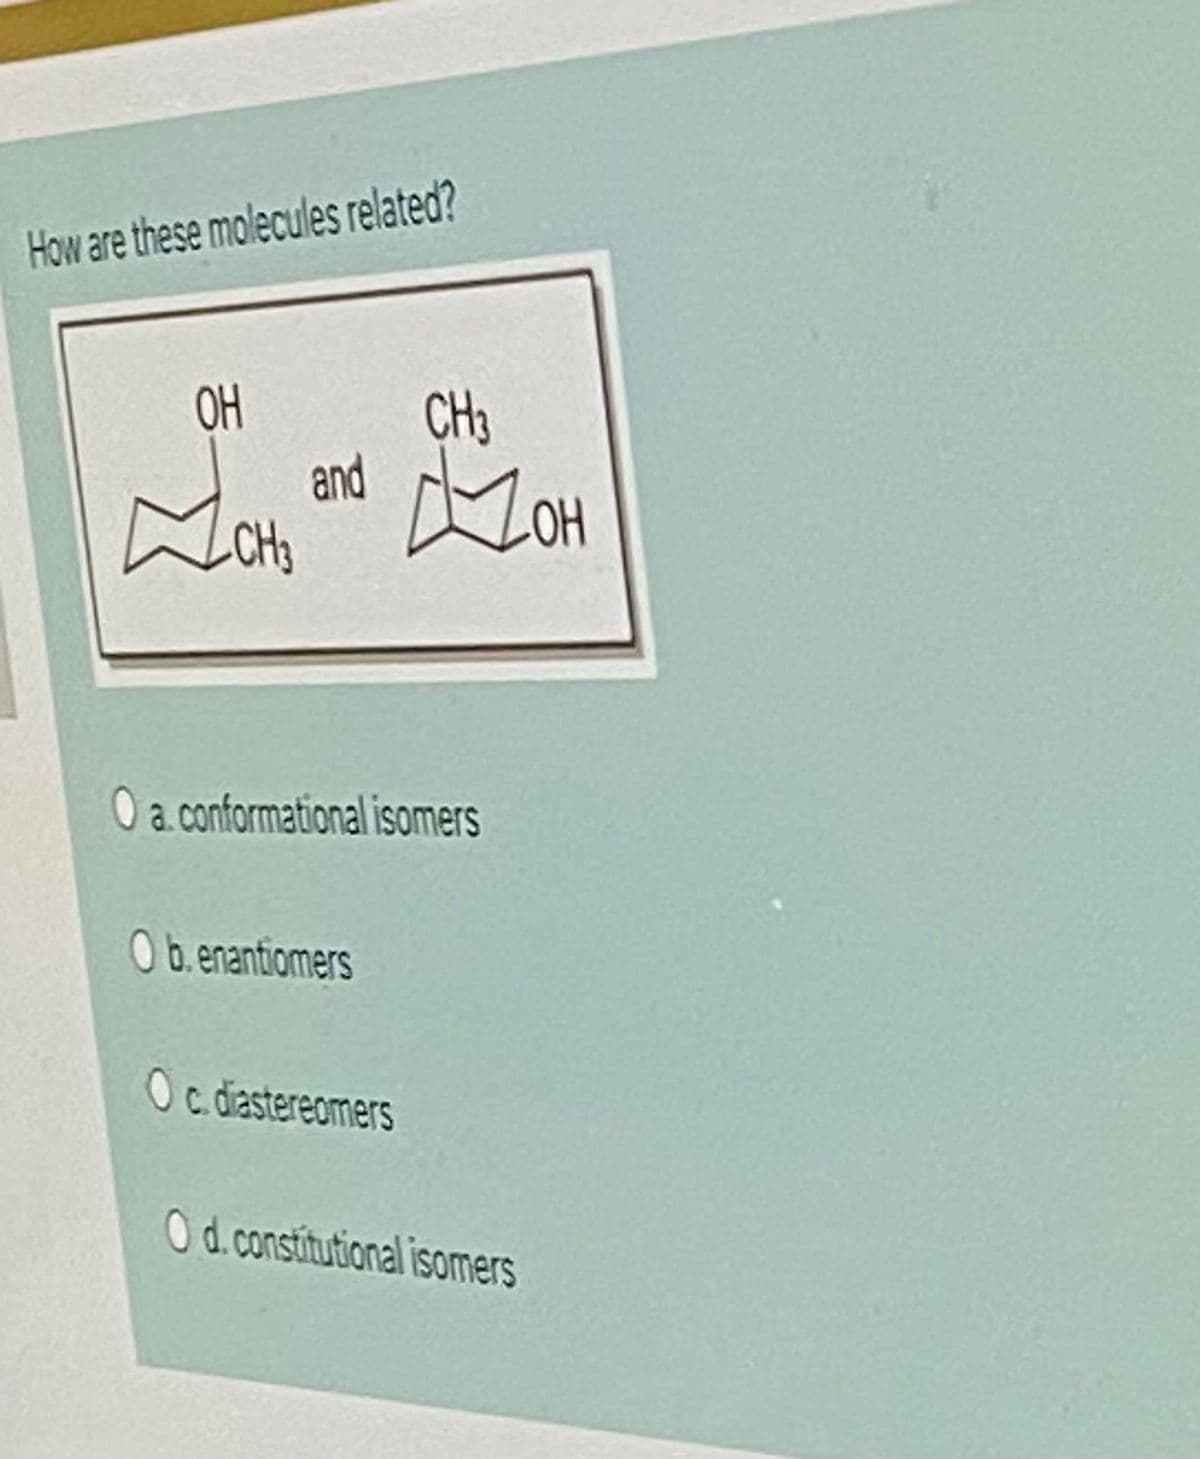 How are these molecules related?
OH
CH3
and
CH3
ZOH
O a.conformational isomers
O b.enantiomers
Oc diasterecmers
Od.constitutional isomers
